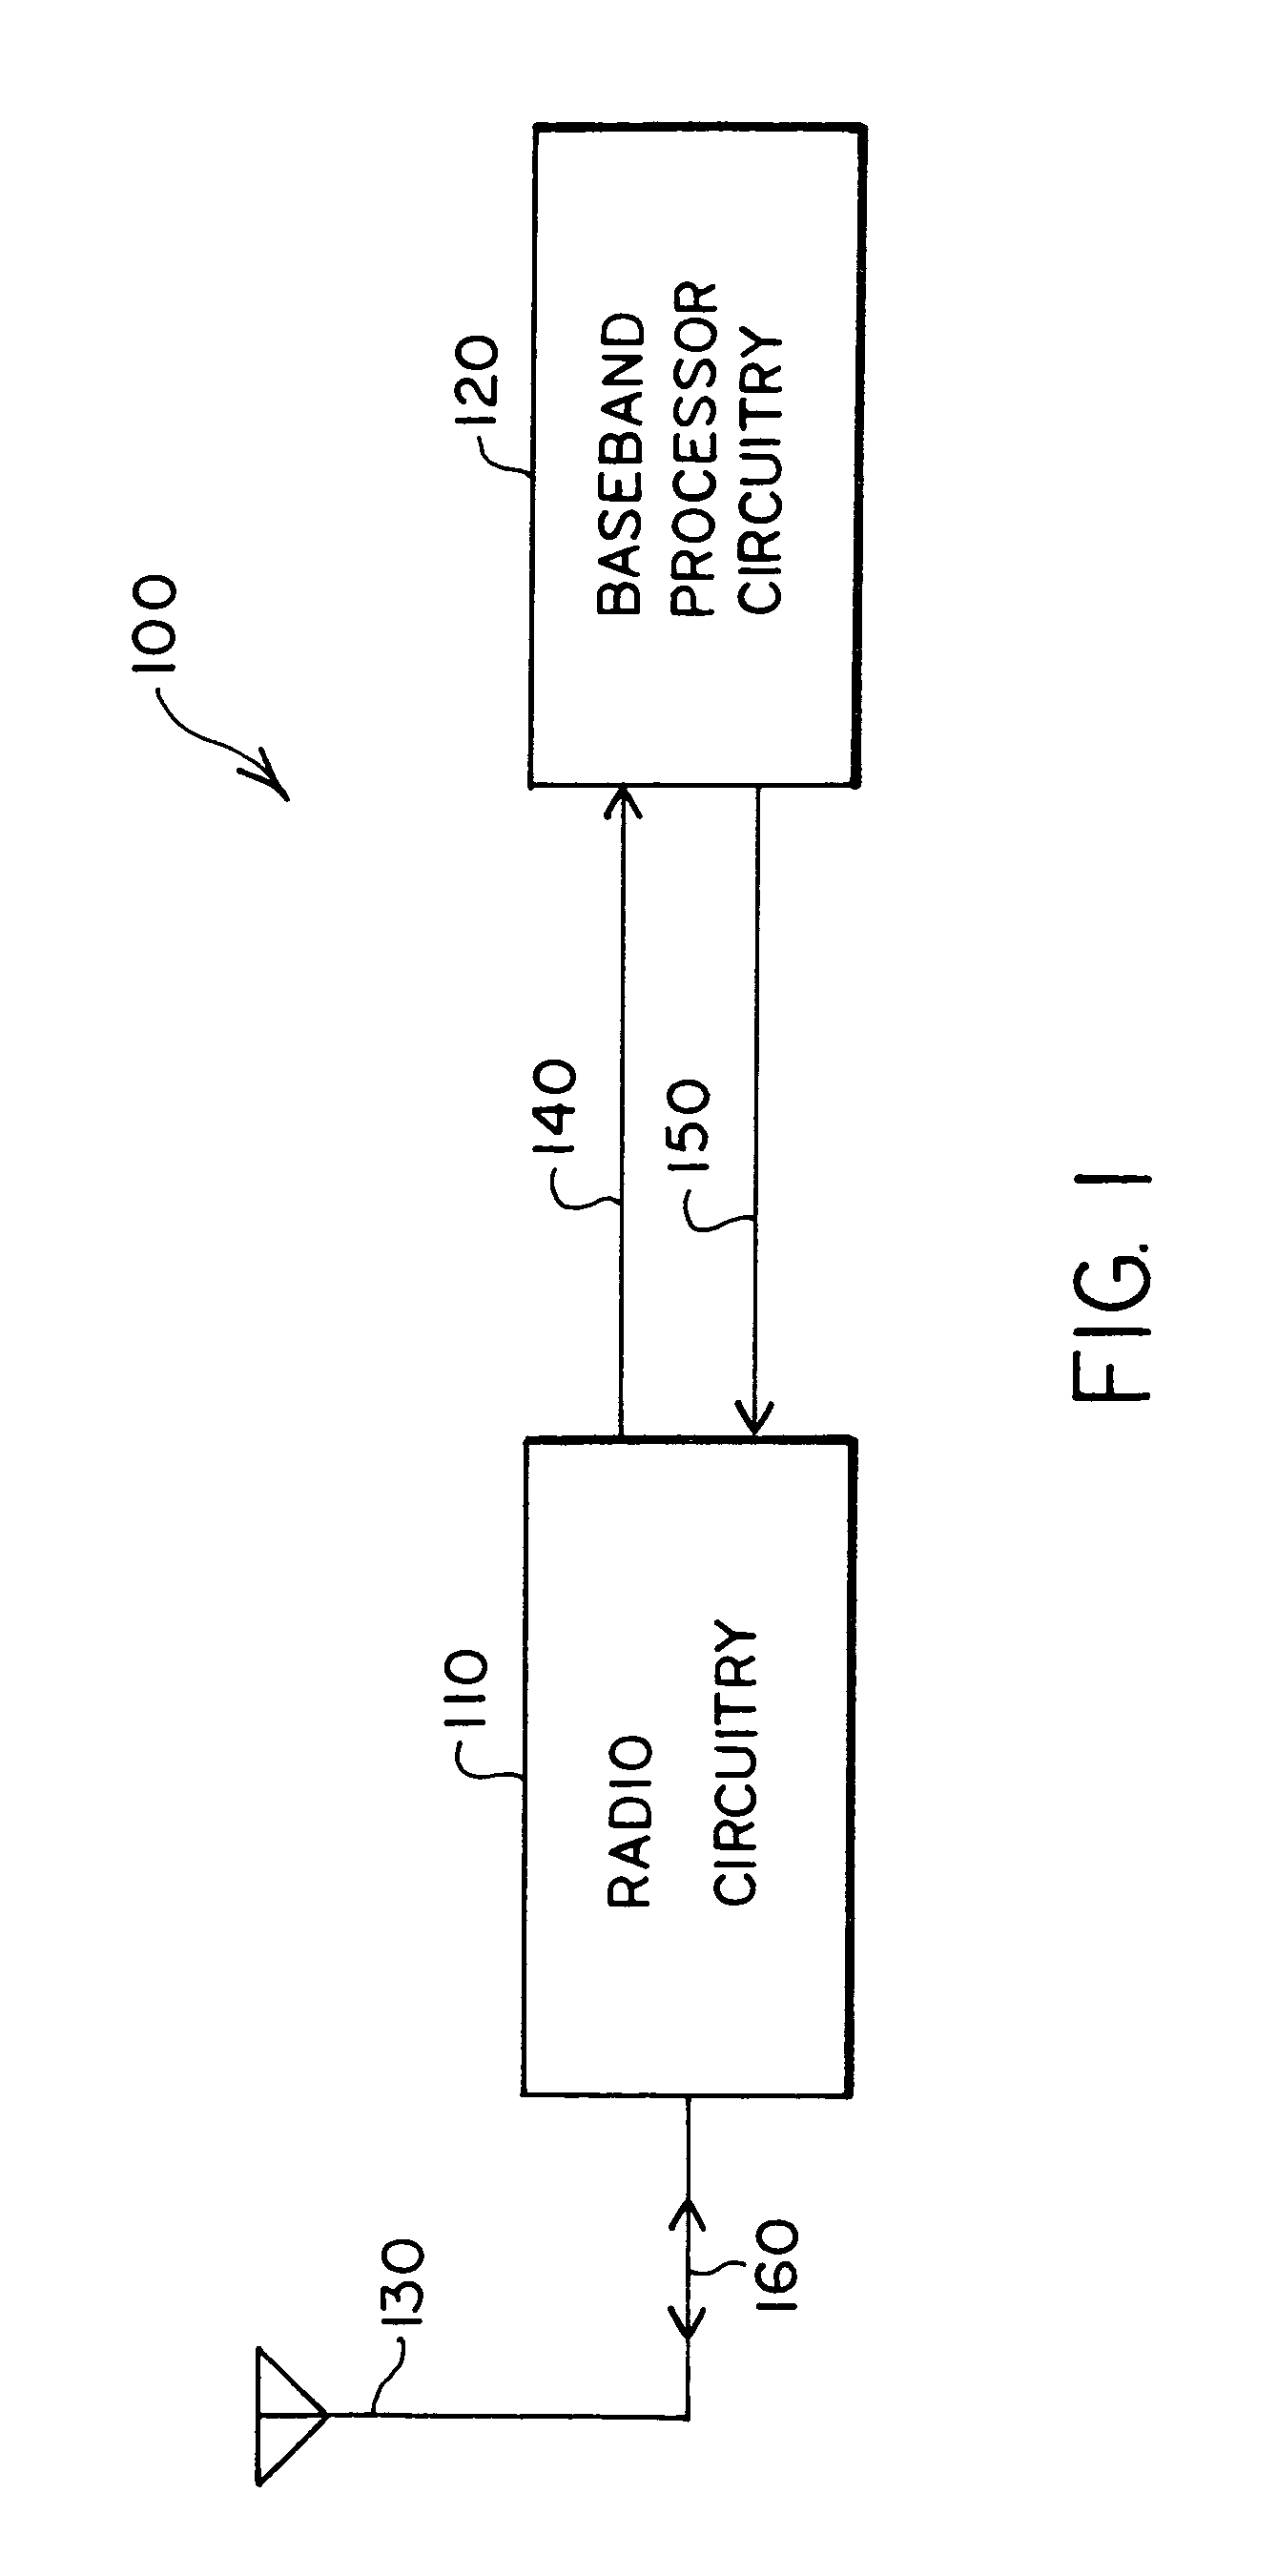 Apparatus and methods for generating radio frequencies in communication circuitry using multiple control signals